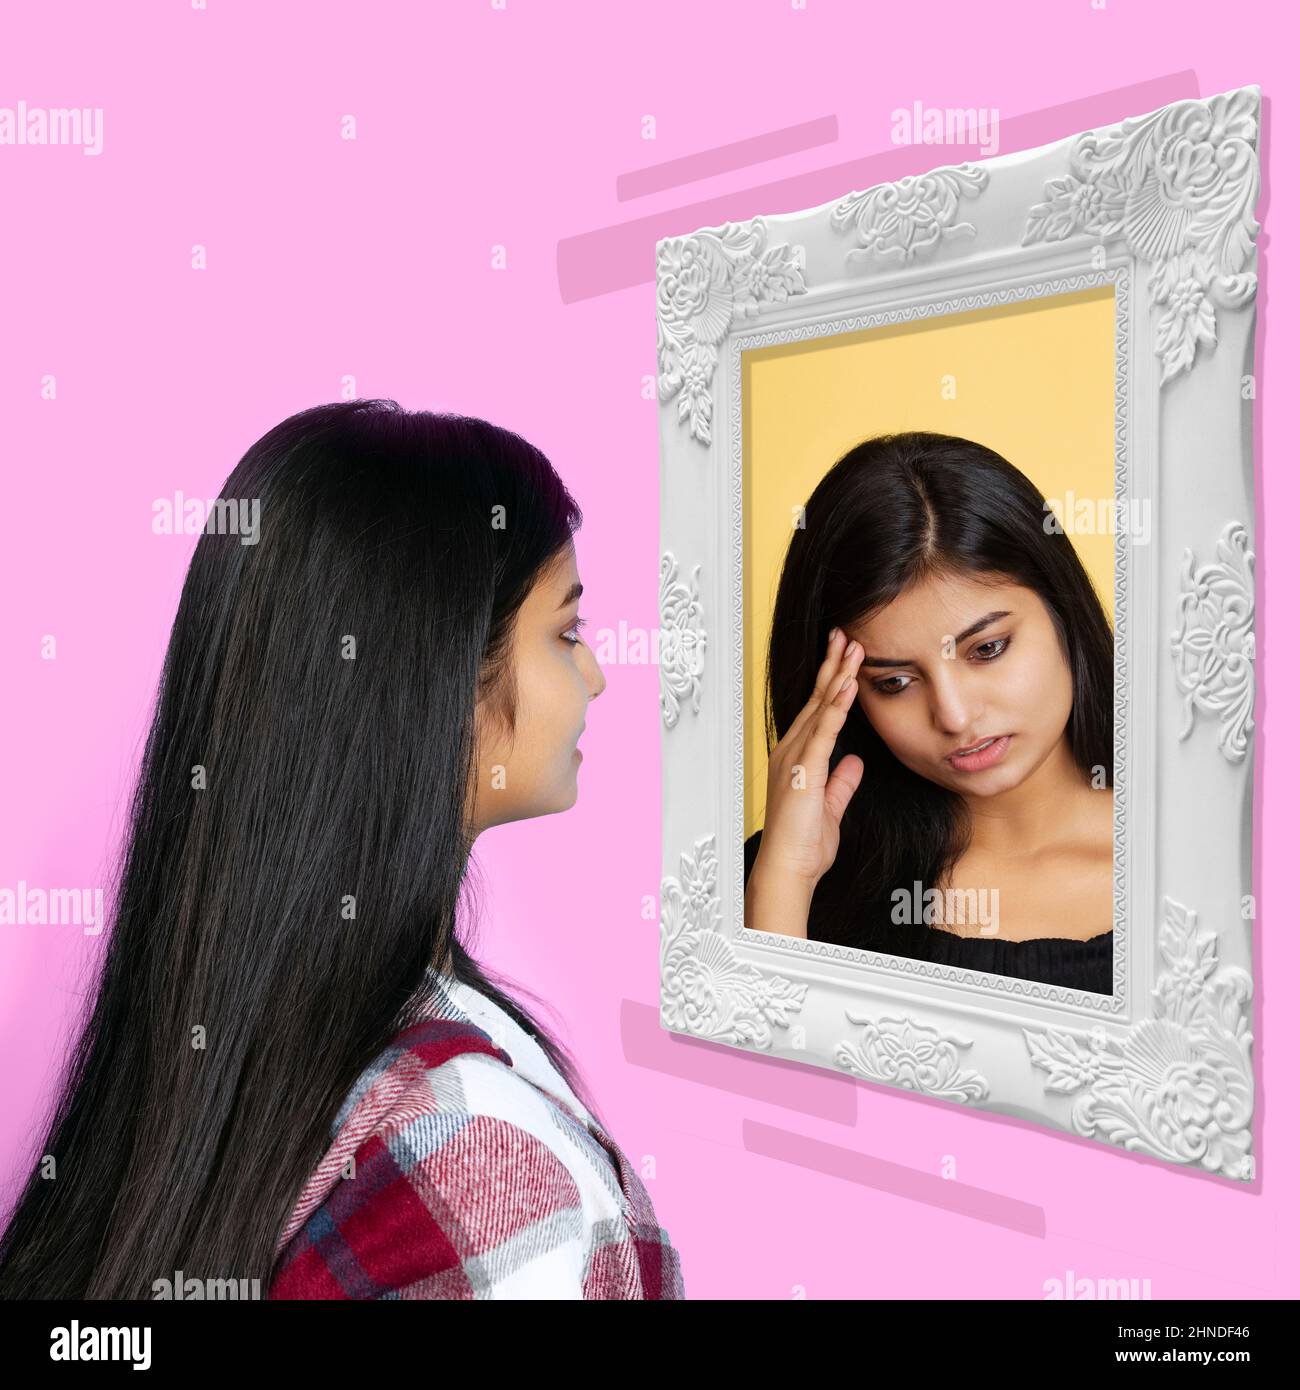 Young girl looking at mirror isolated on light background. Contemporary art collage. Concept of emotions, inner world, mental health Stock Photo